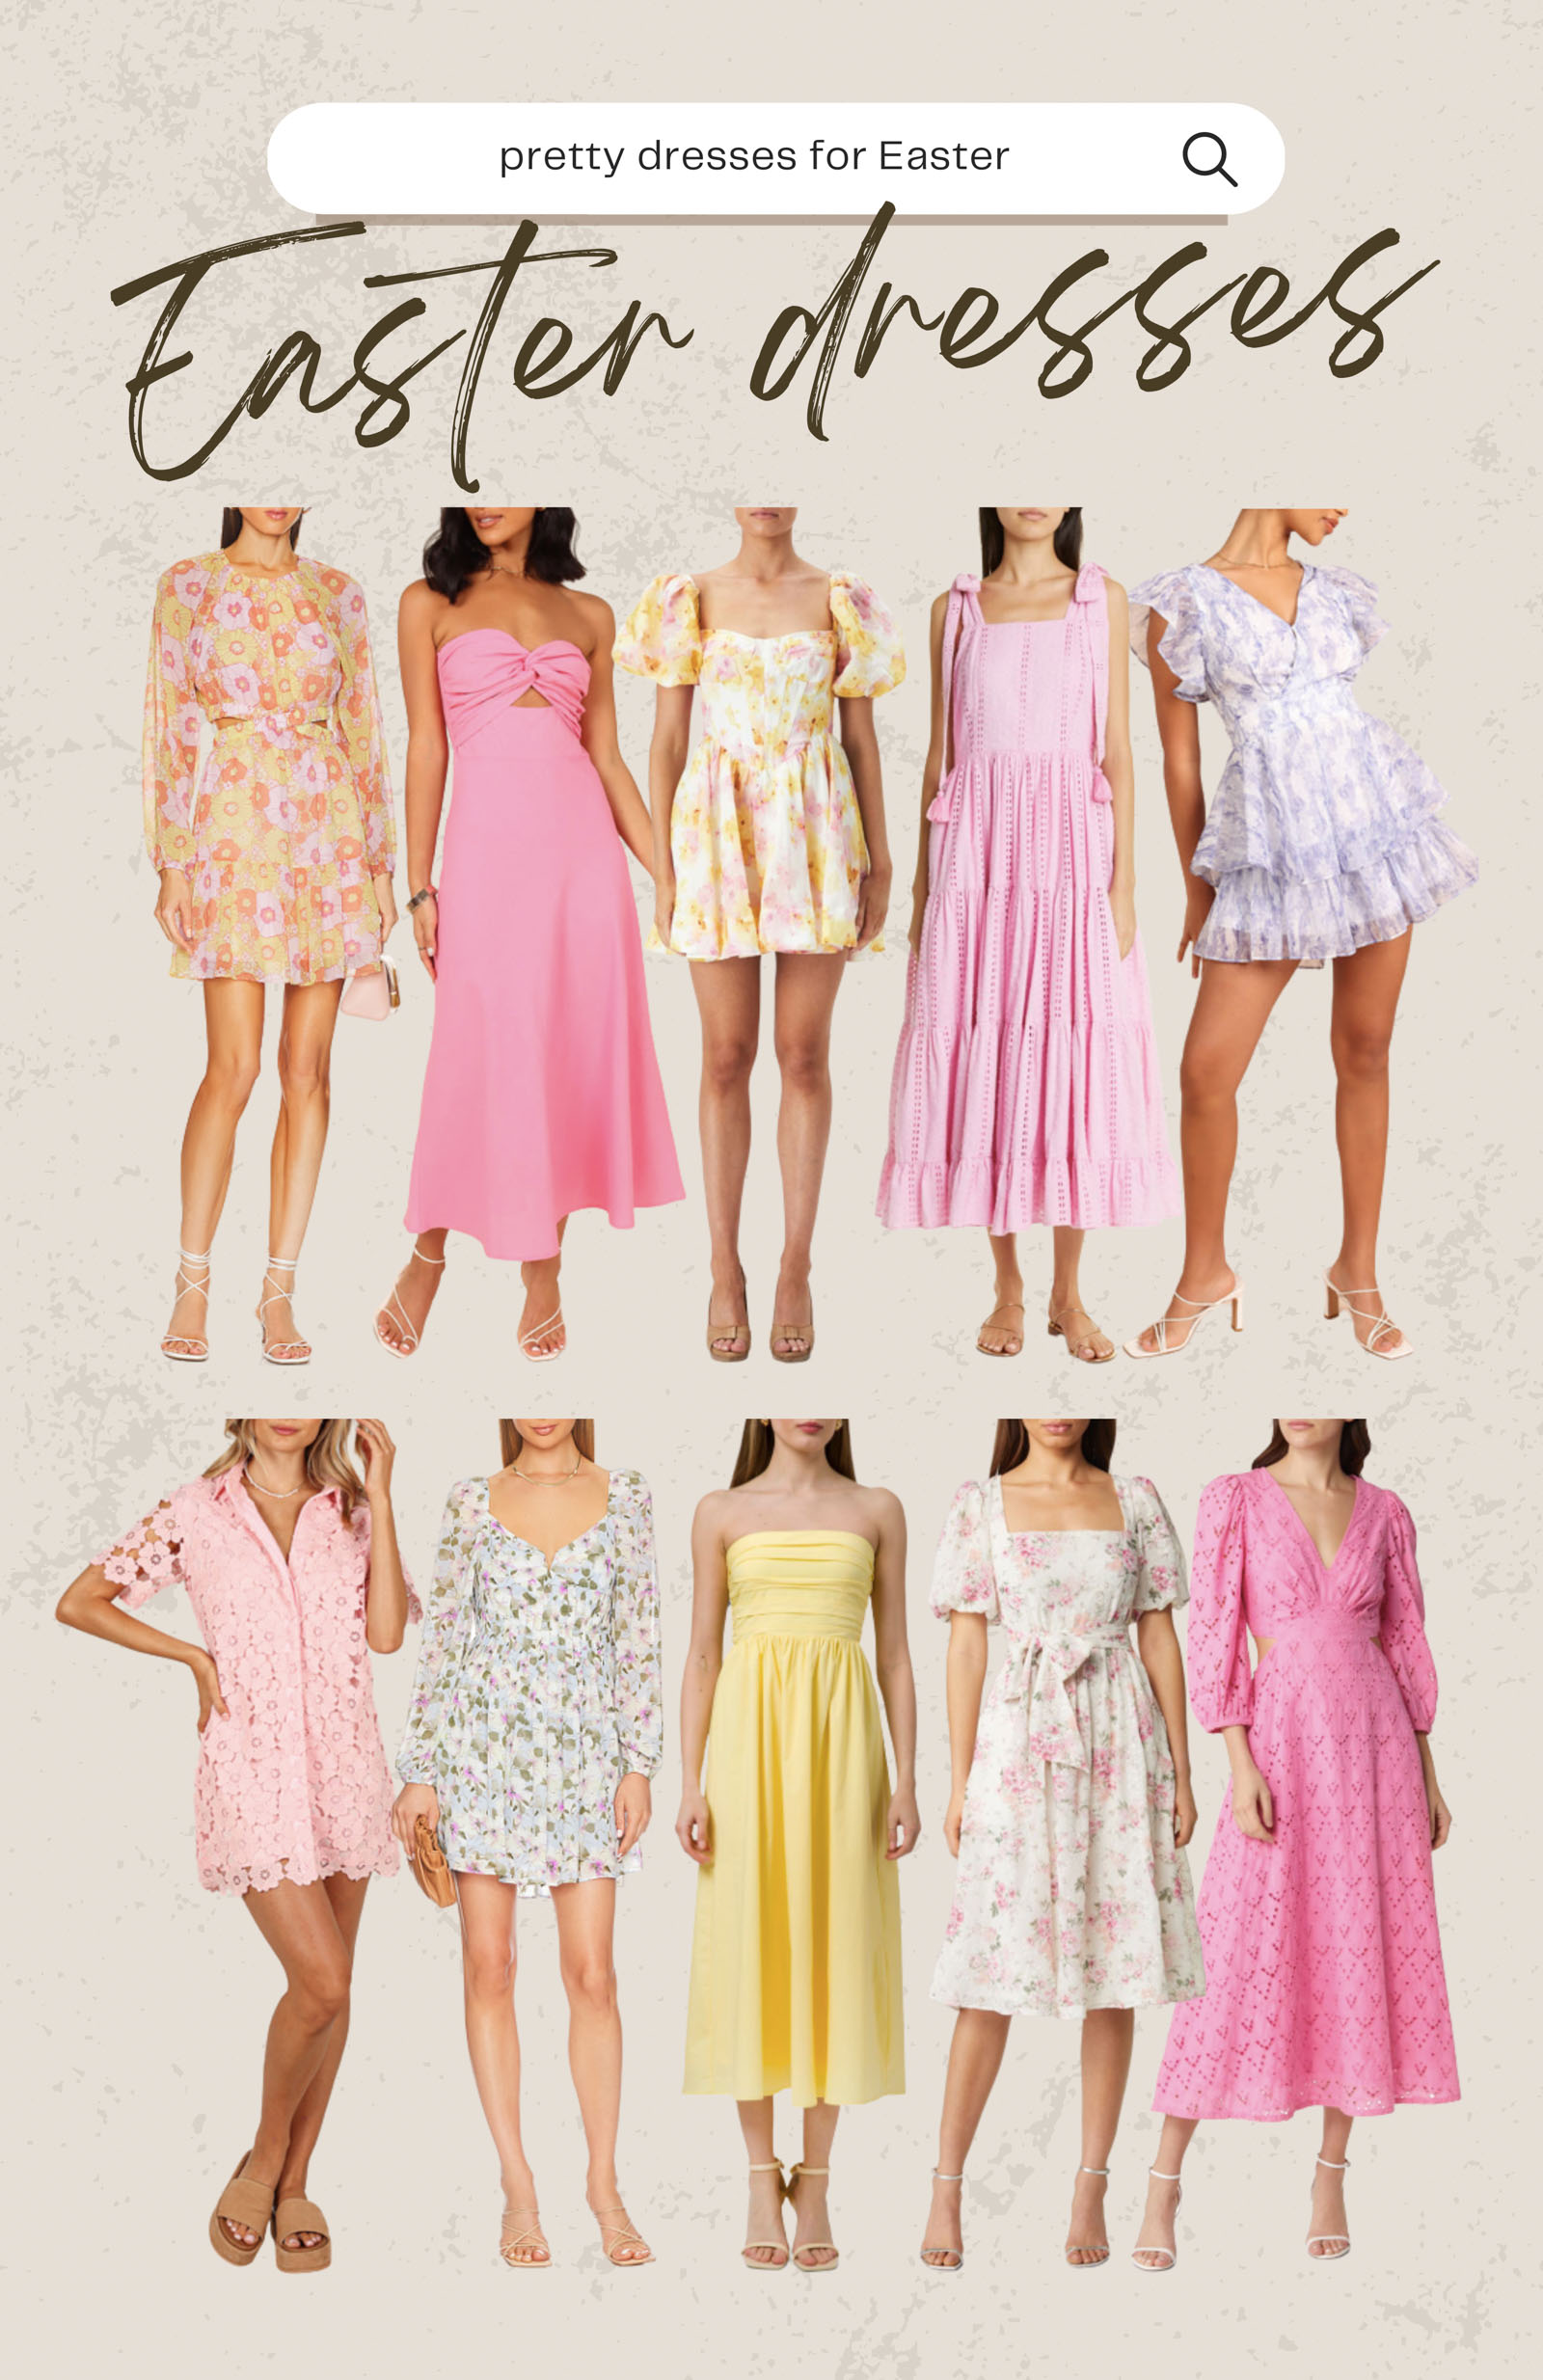 Easter Dresses - Southern Curls & Pearls